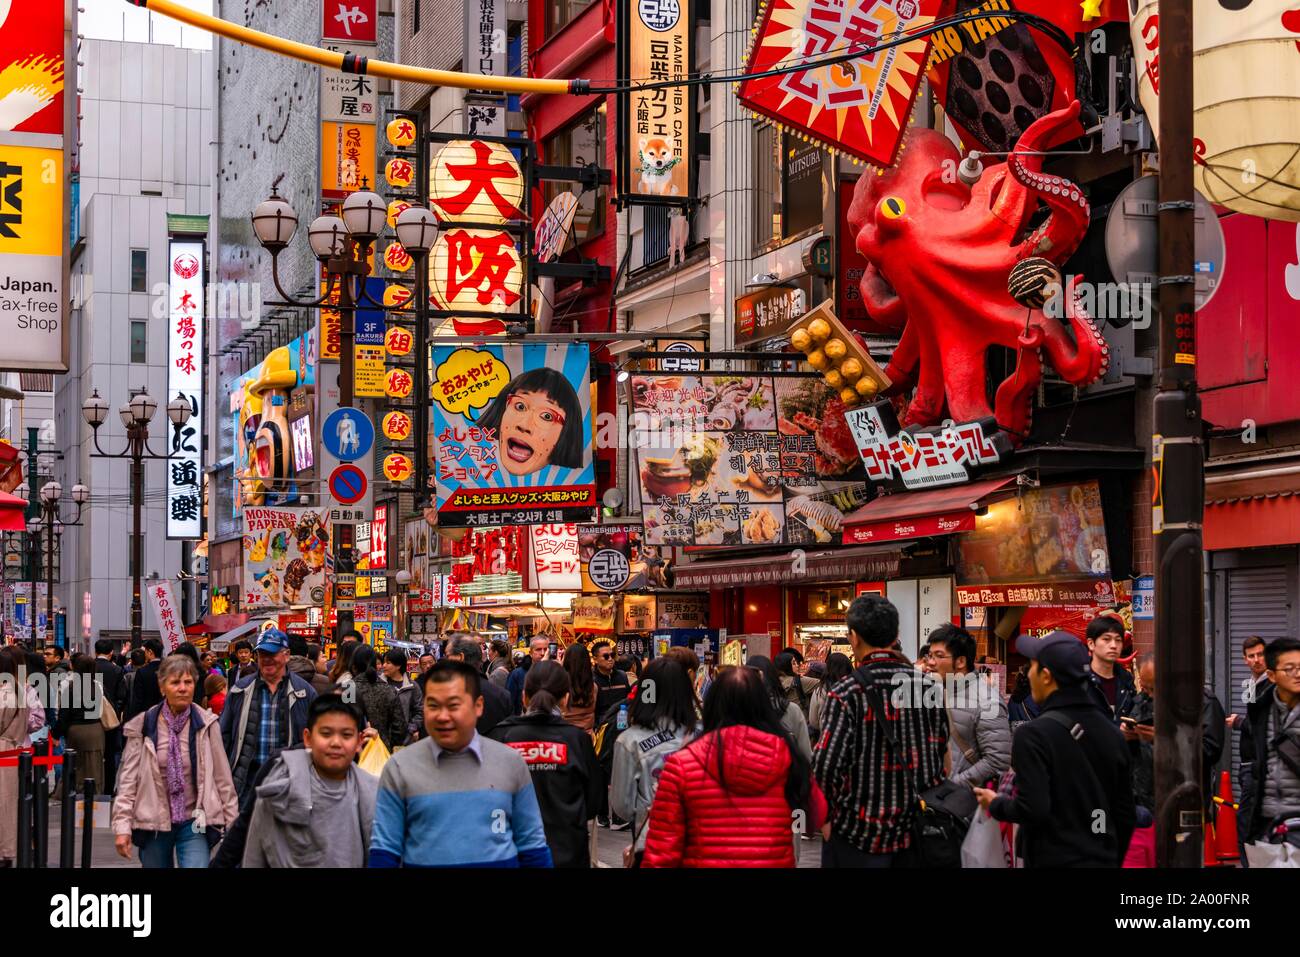 Crowd crowded in pedestrian zone with lots of illuminated advertising for restaurants and shopping centers, Dotonbori, Osaka, Japan Stock Photo